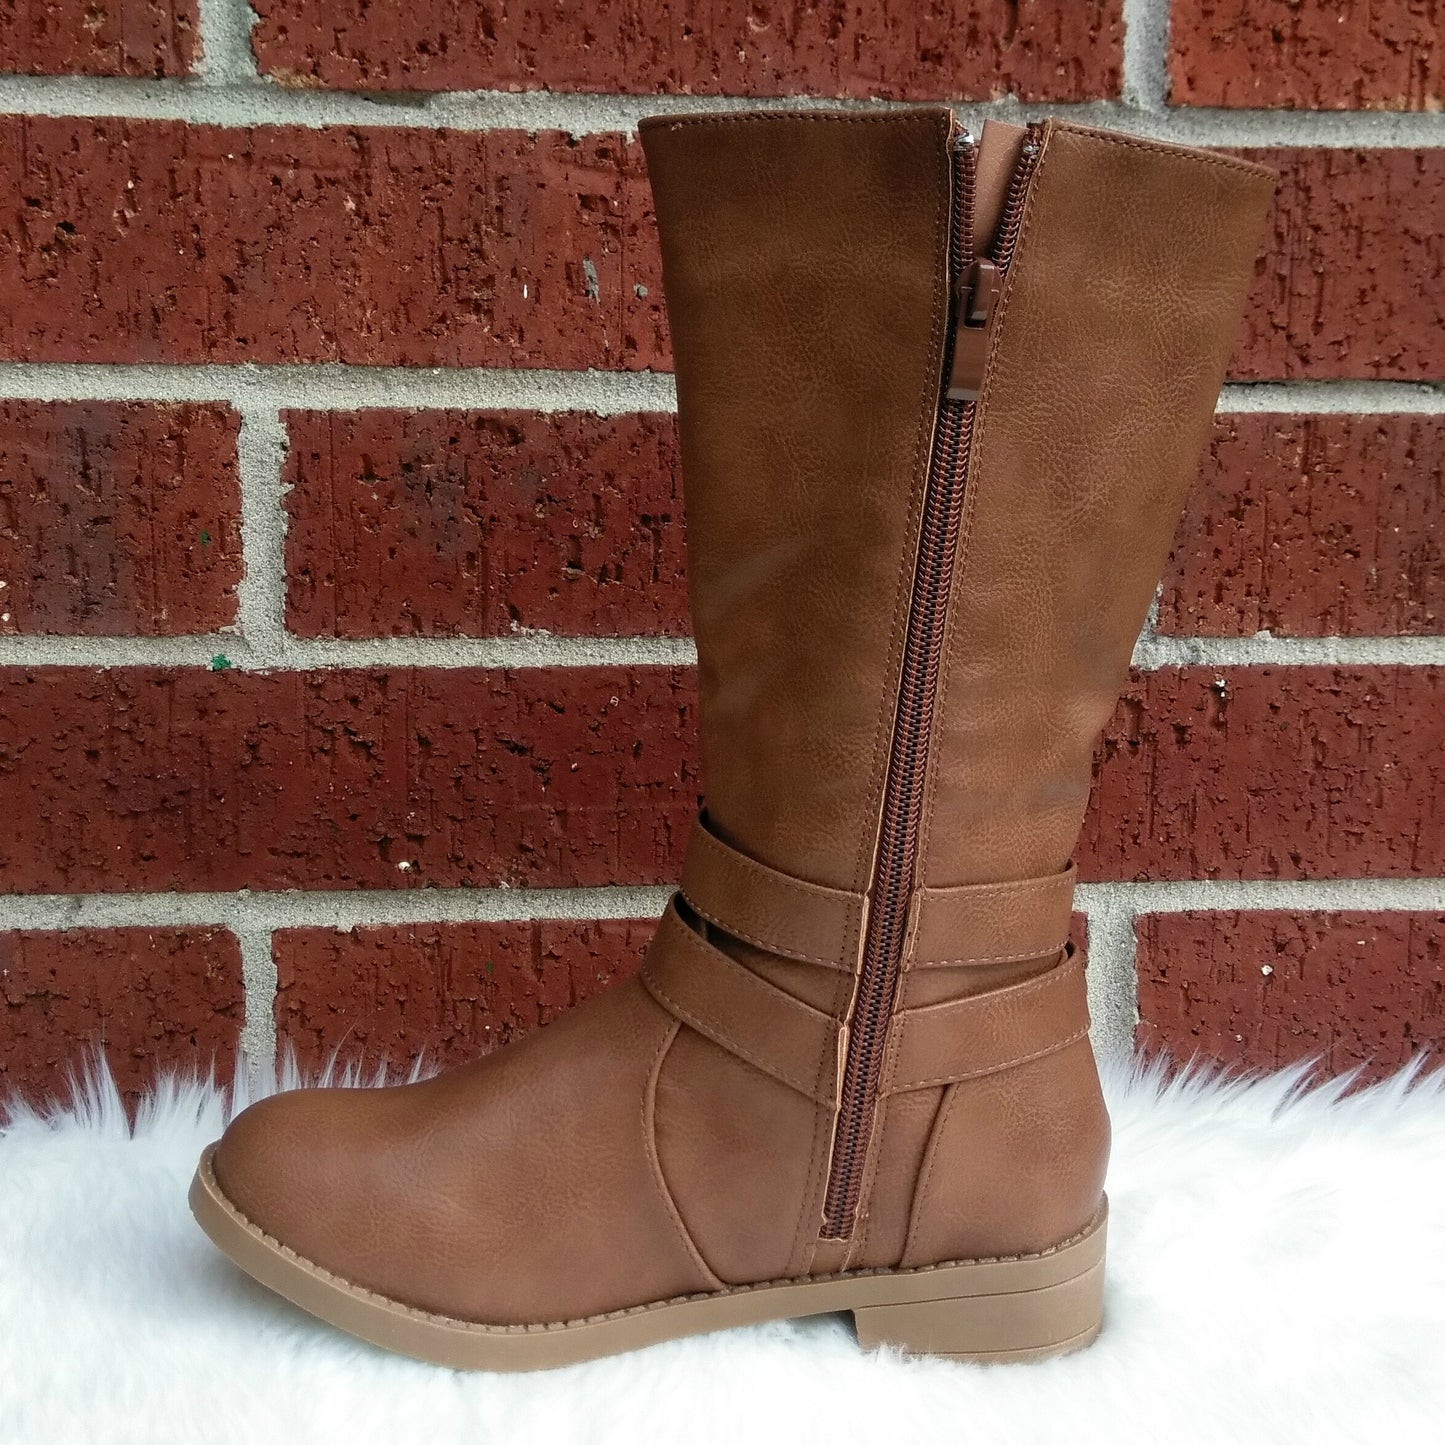 Girl's Tan Boots with Zipper and Buckles Detail